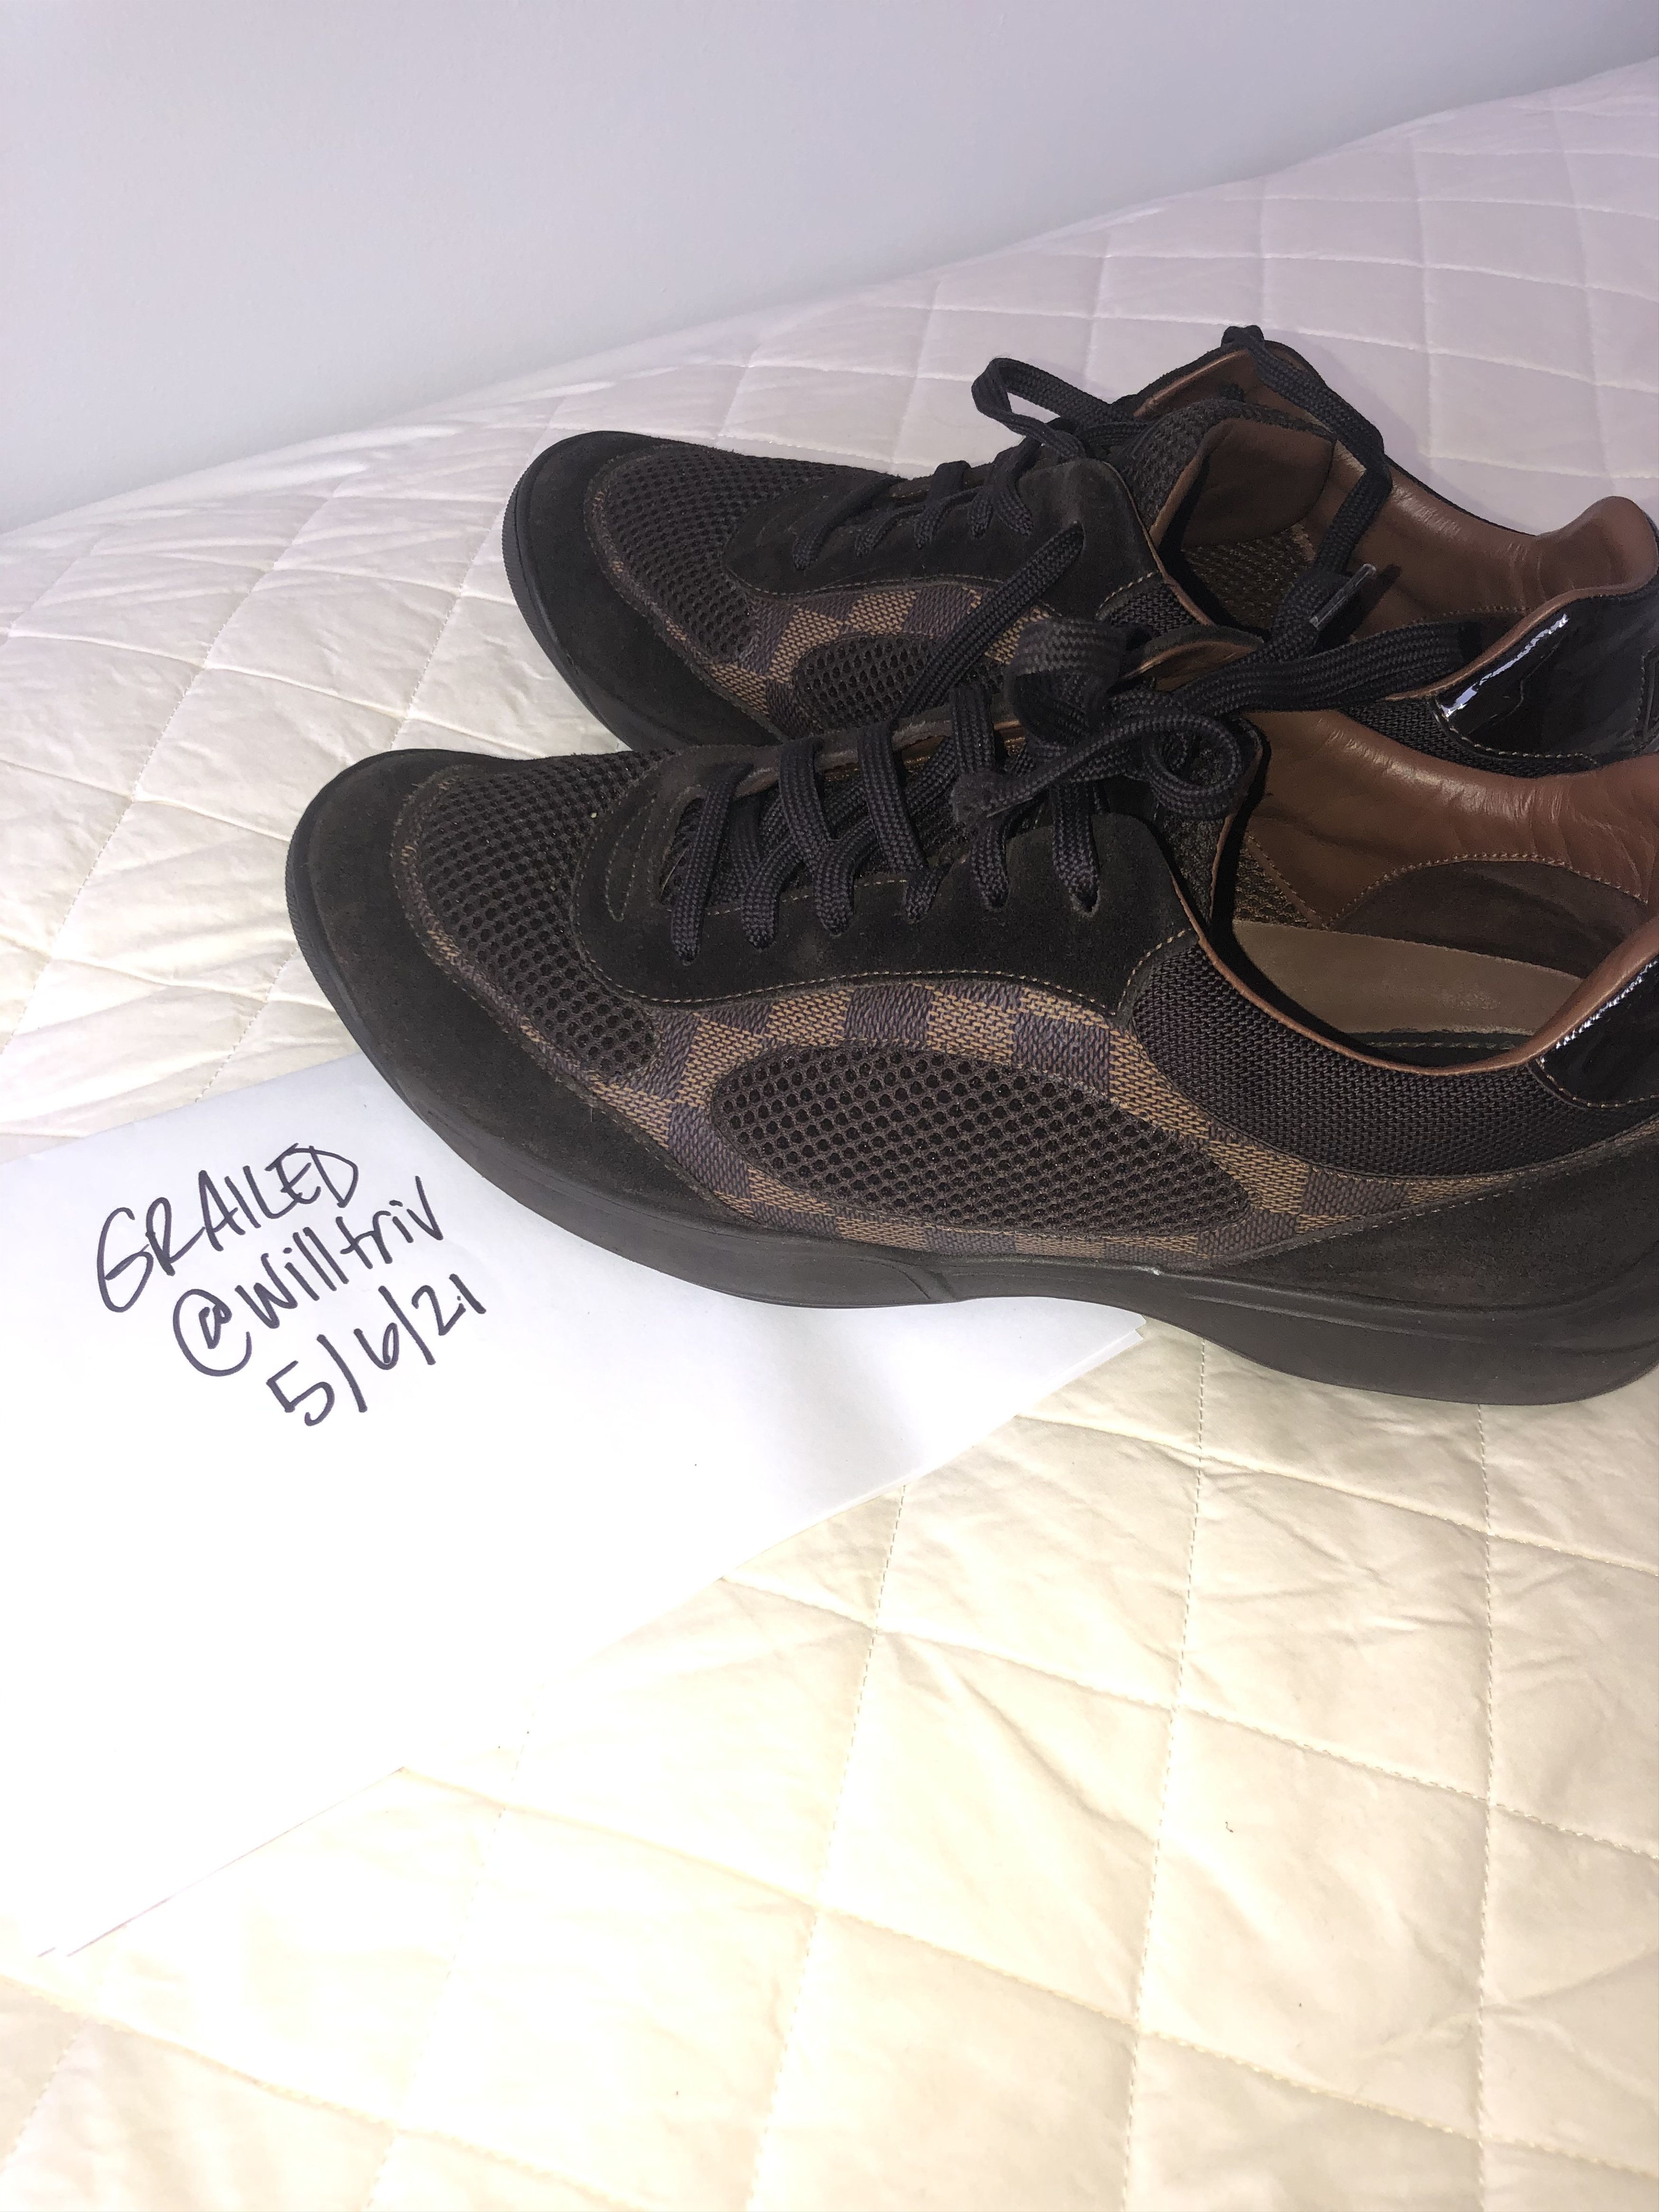 Louis Vuitton Brown Suede and Leather Low tops Size US 7 / EU 40 - 7 Thumbnail